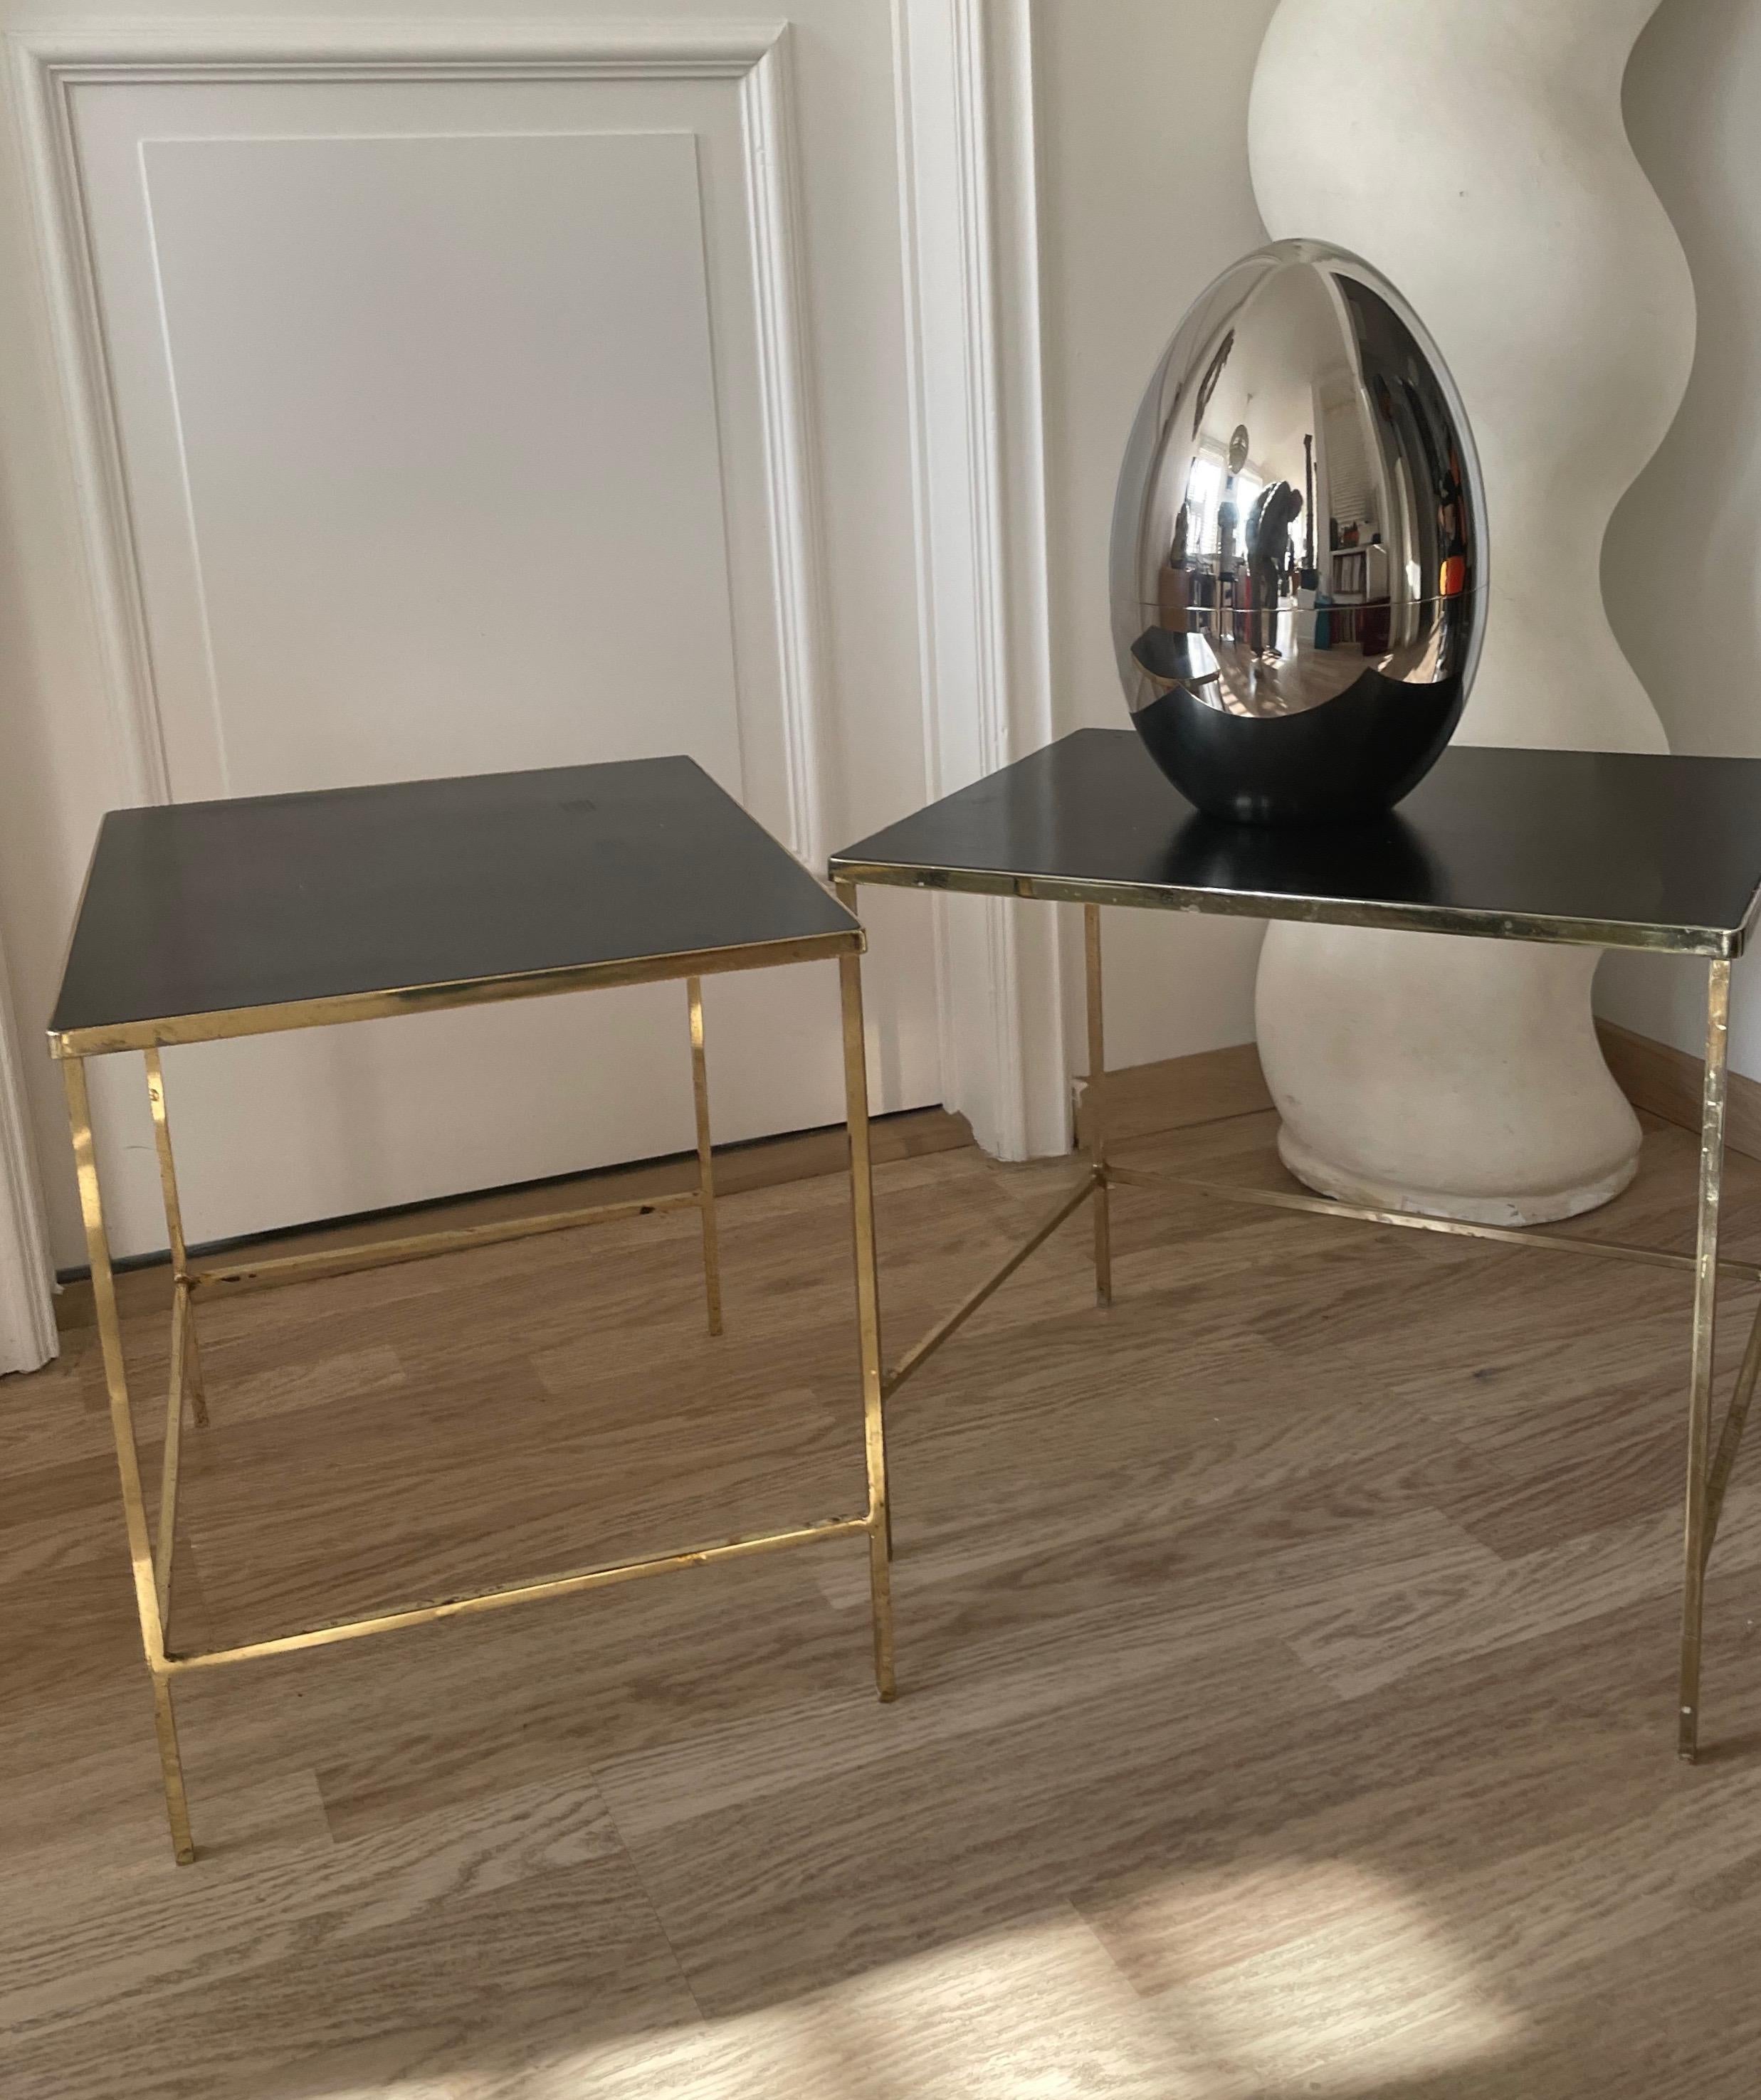 Pair of Minimalist Gilt Side Tables with Black Formica Tops, France, 1970 For Sale 1